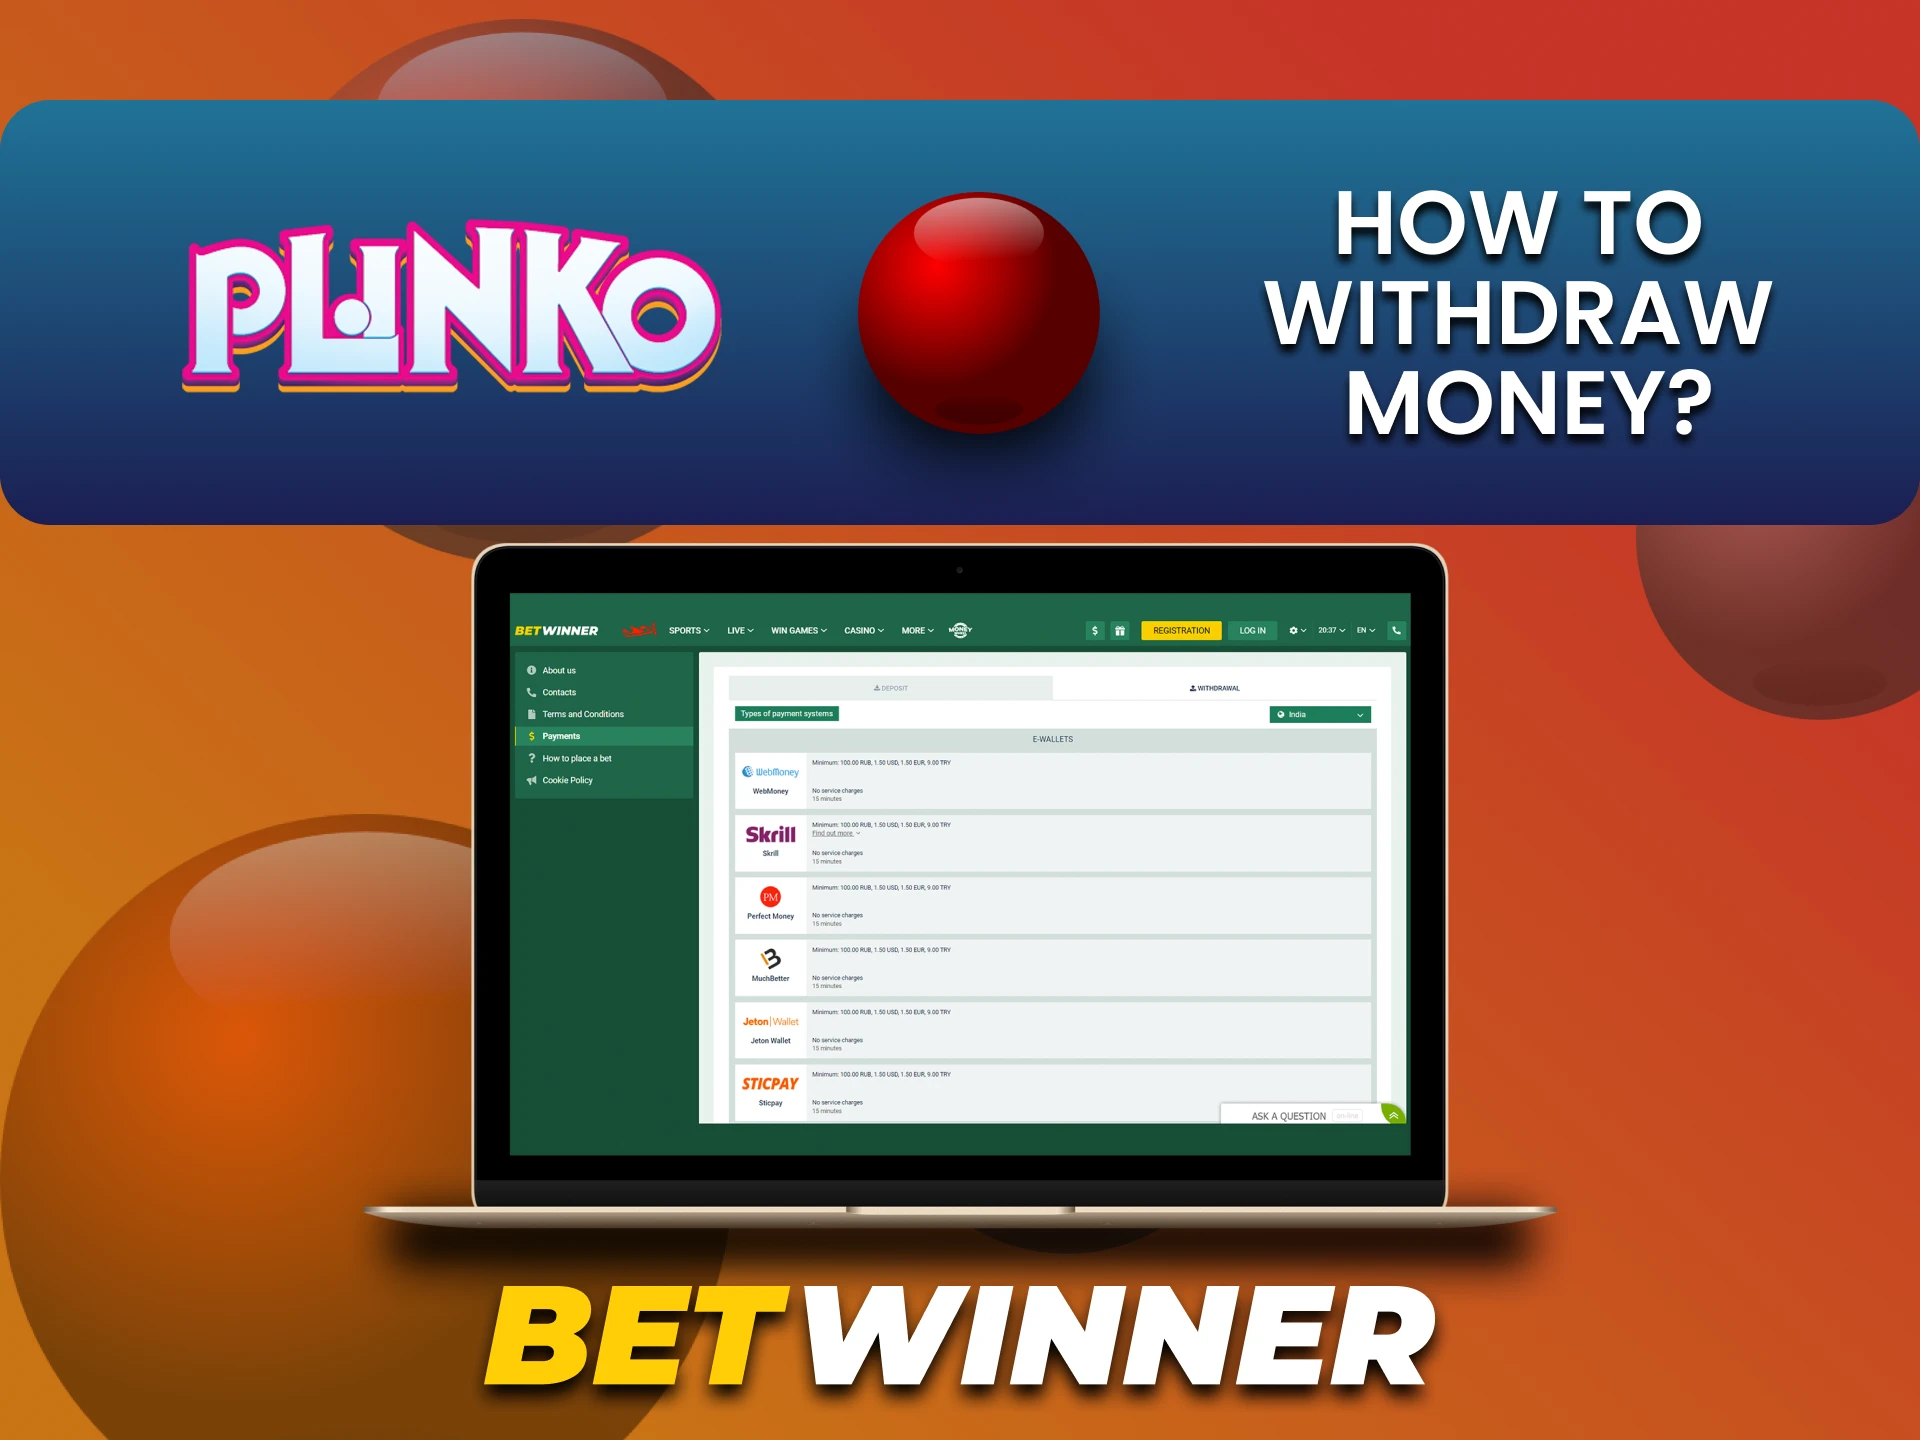 Find out how to withdraw funds at Betwinner for Plinko.